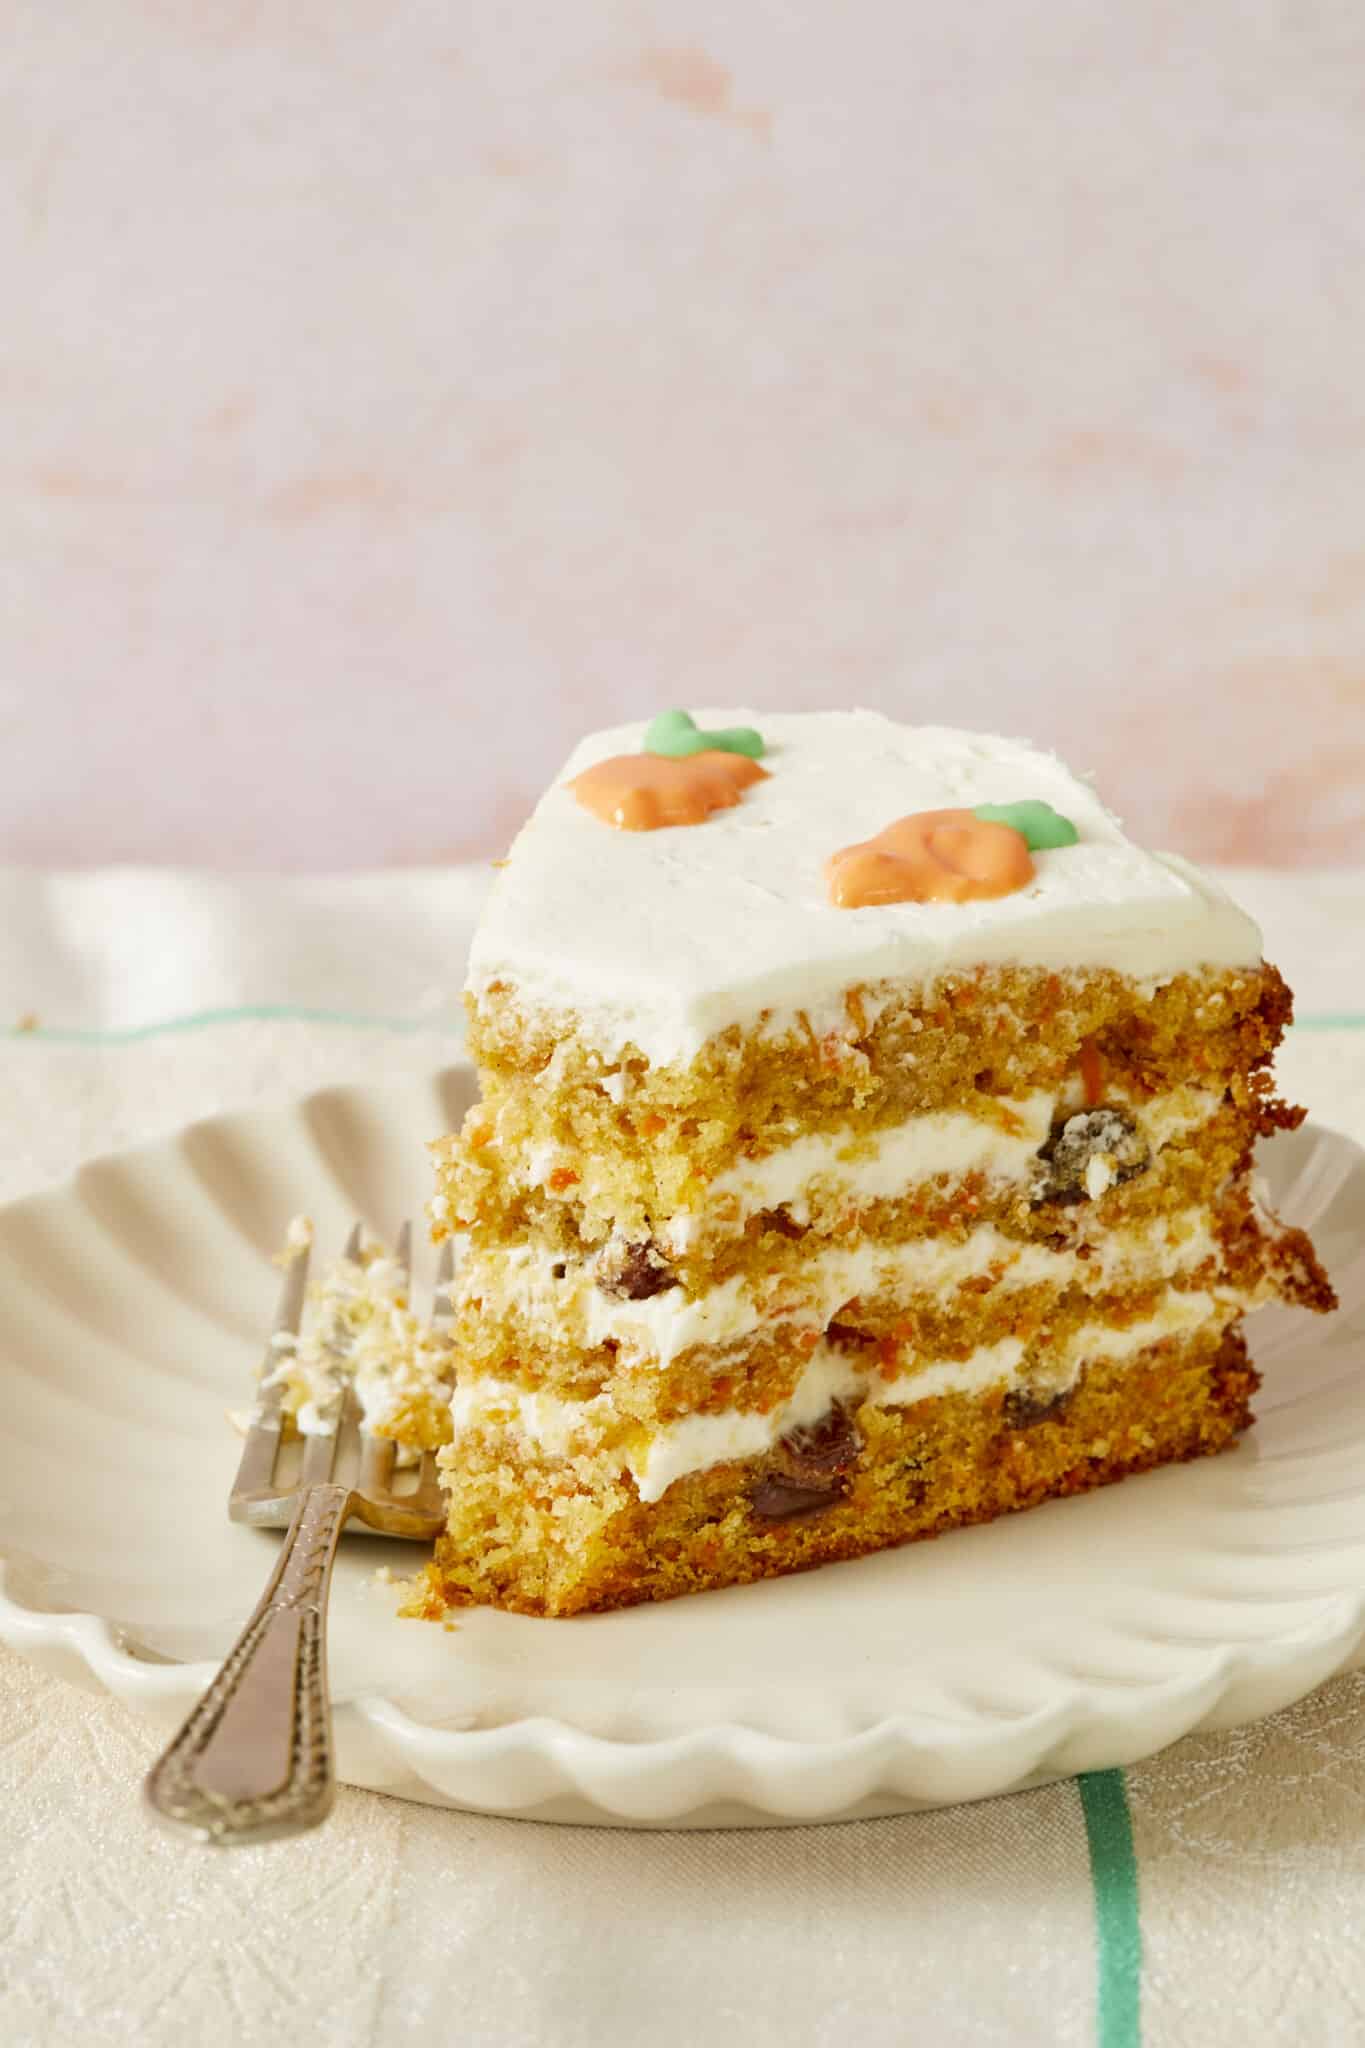 A slice of moist and soft carrot cake full of carrots and raisins, topped with tangy smooth cream cheese frosting, on a plate with one bite taken to enjoy.